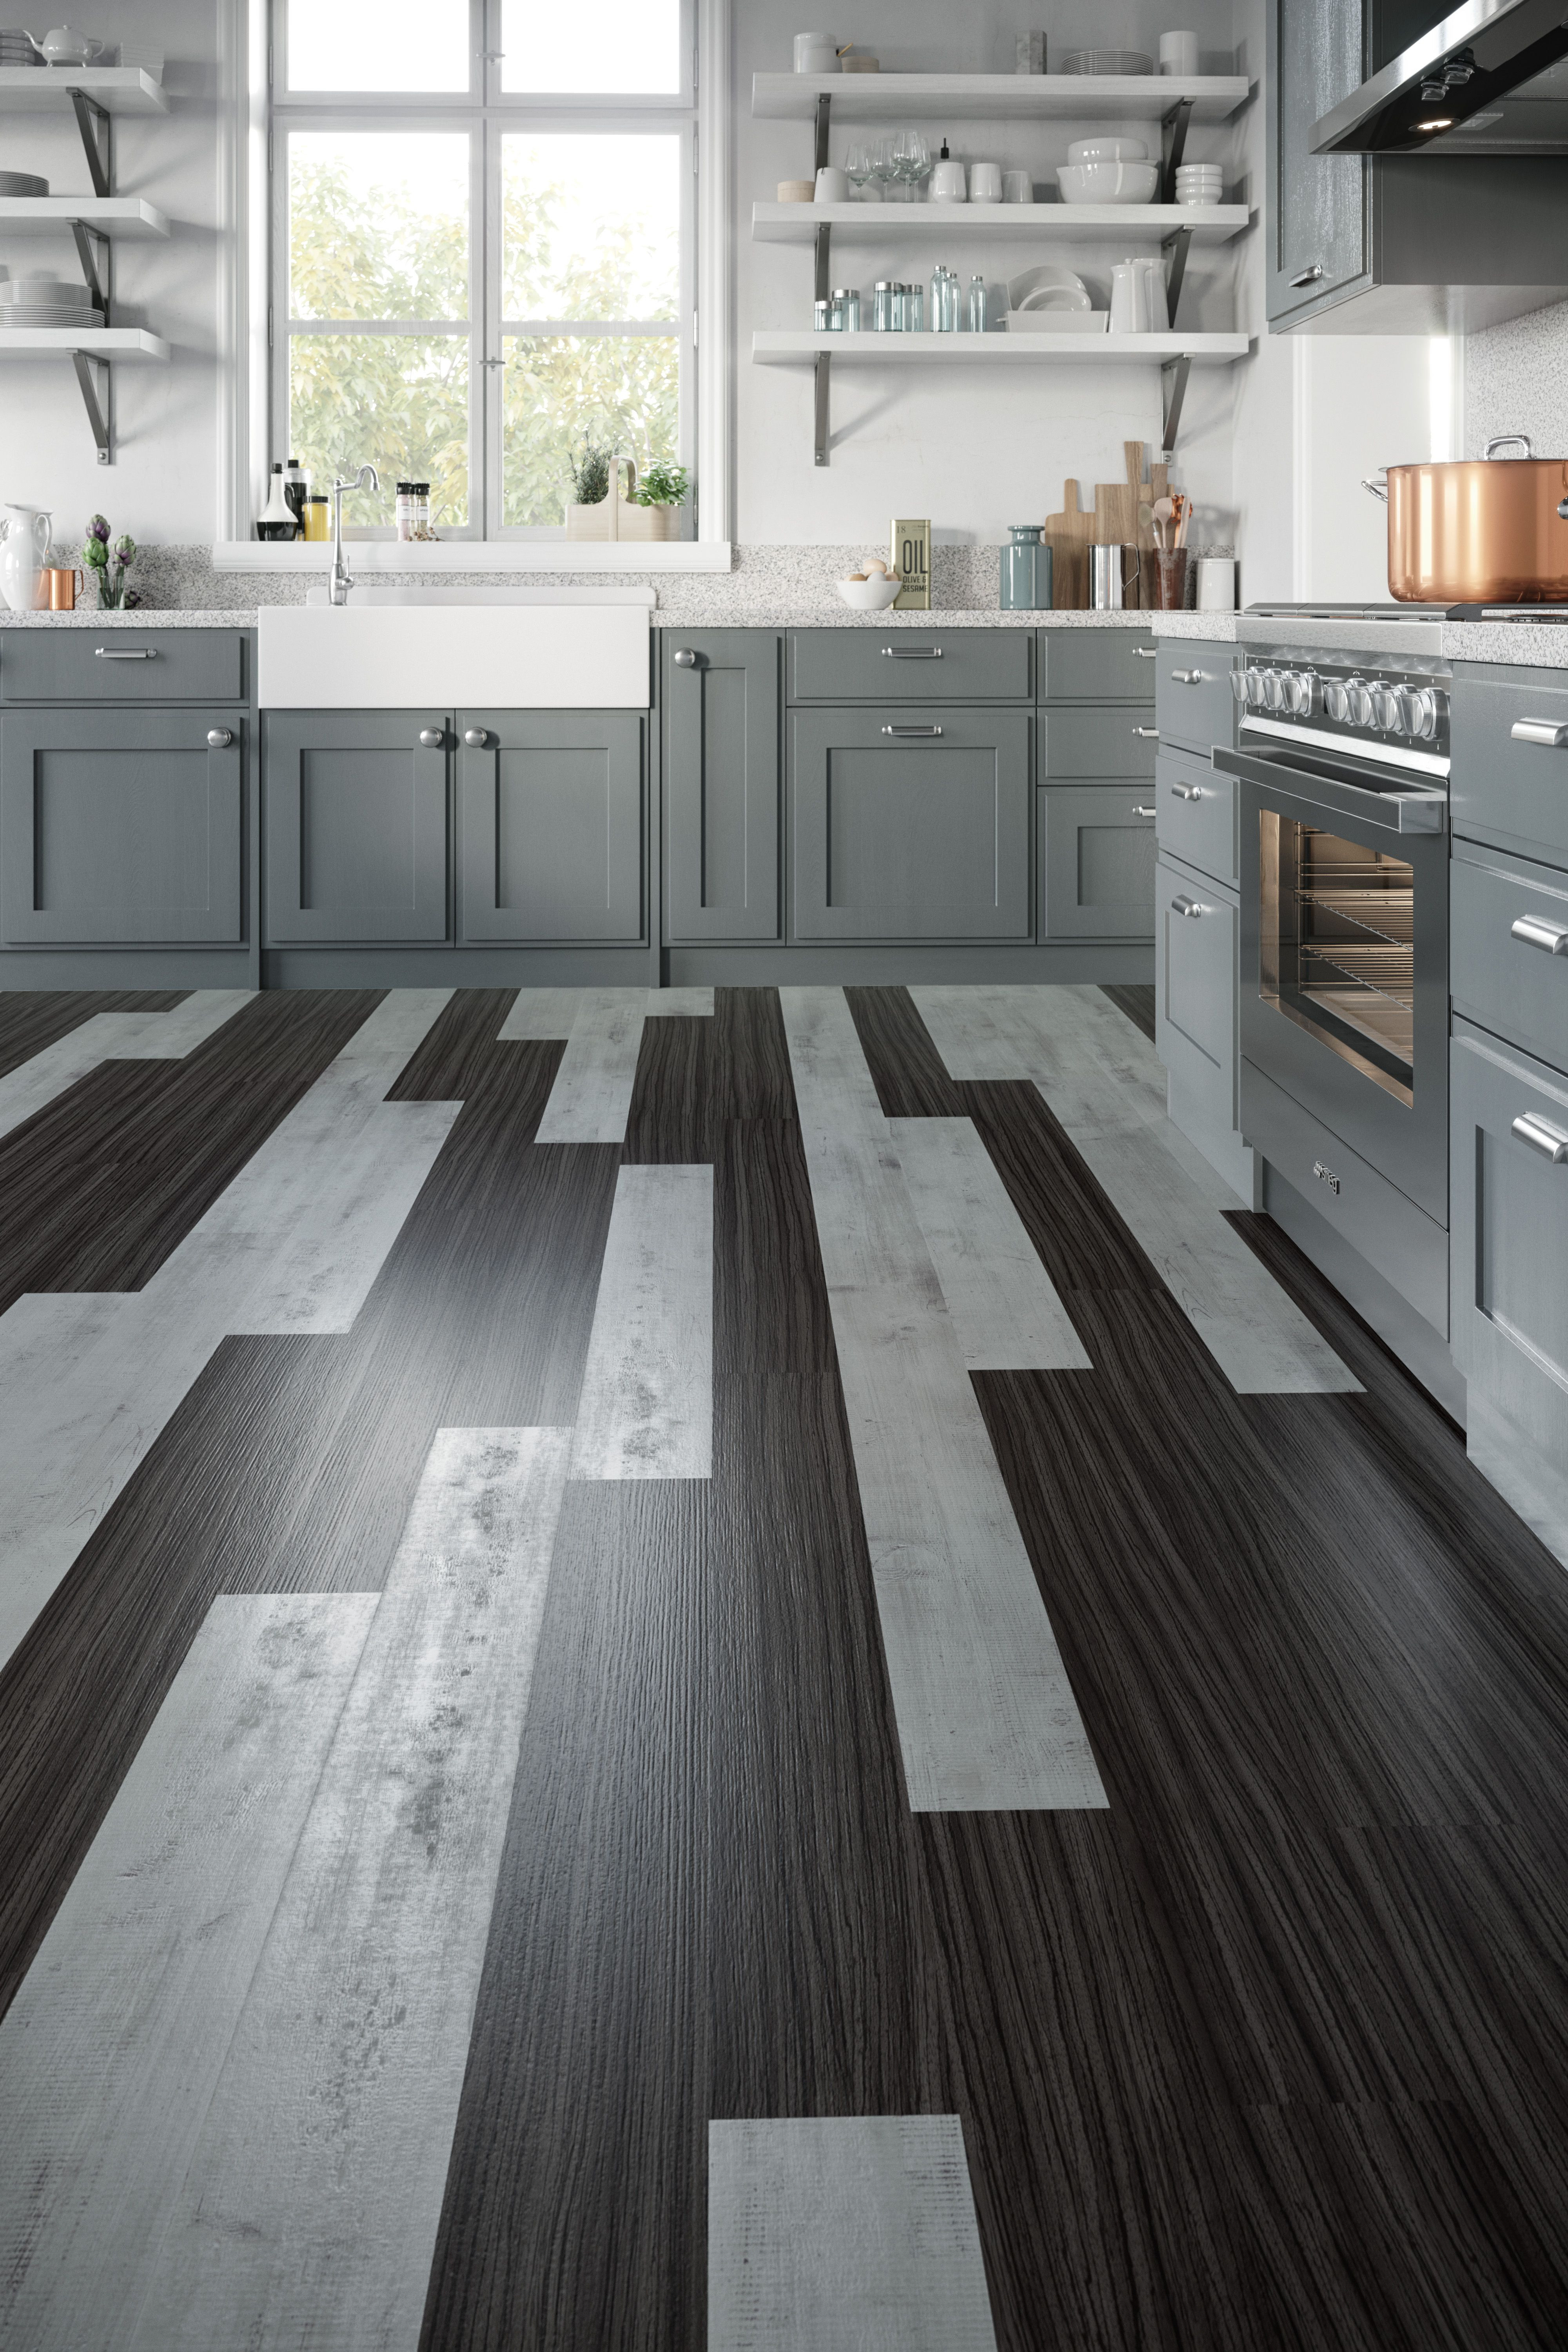 15 Stylish Unfinished Hardwood Flooring St Louis 2024 free download unfinished hardwood flooring st louis of featuring luxury vinyl plank and tile point of view from our design in featuring luxury vinyl plank and tile point of view from our design mix floori